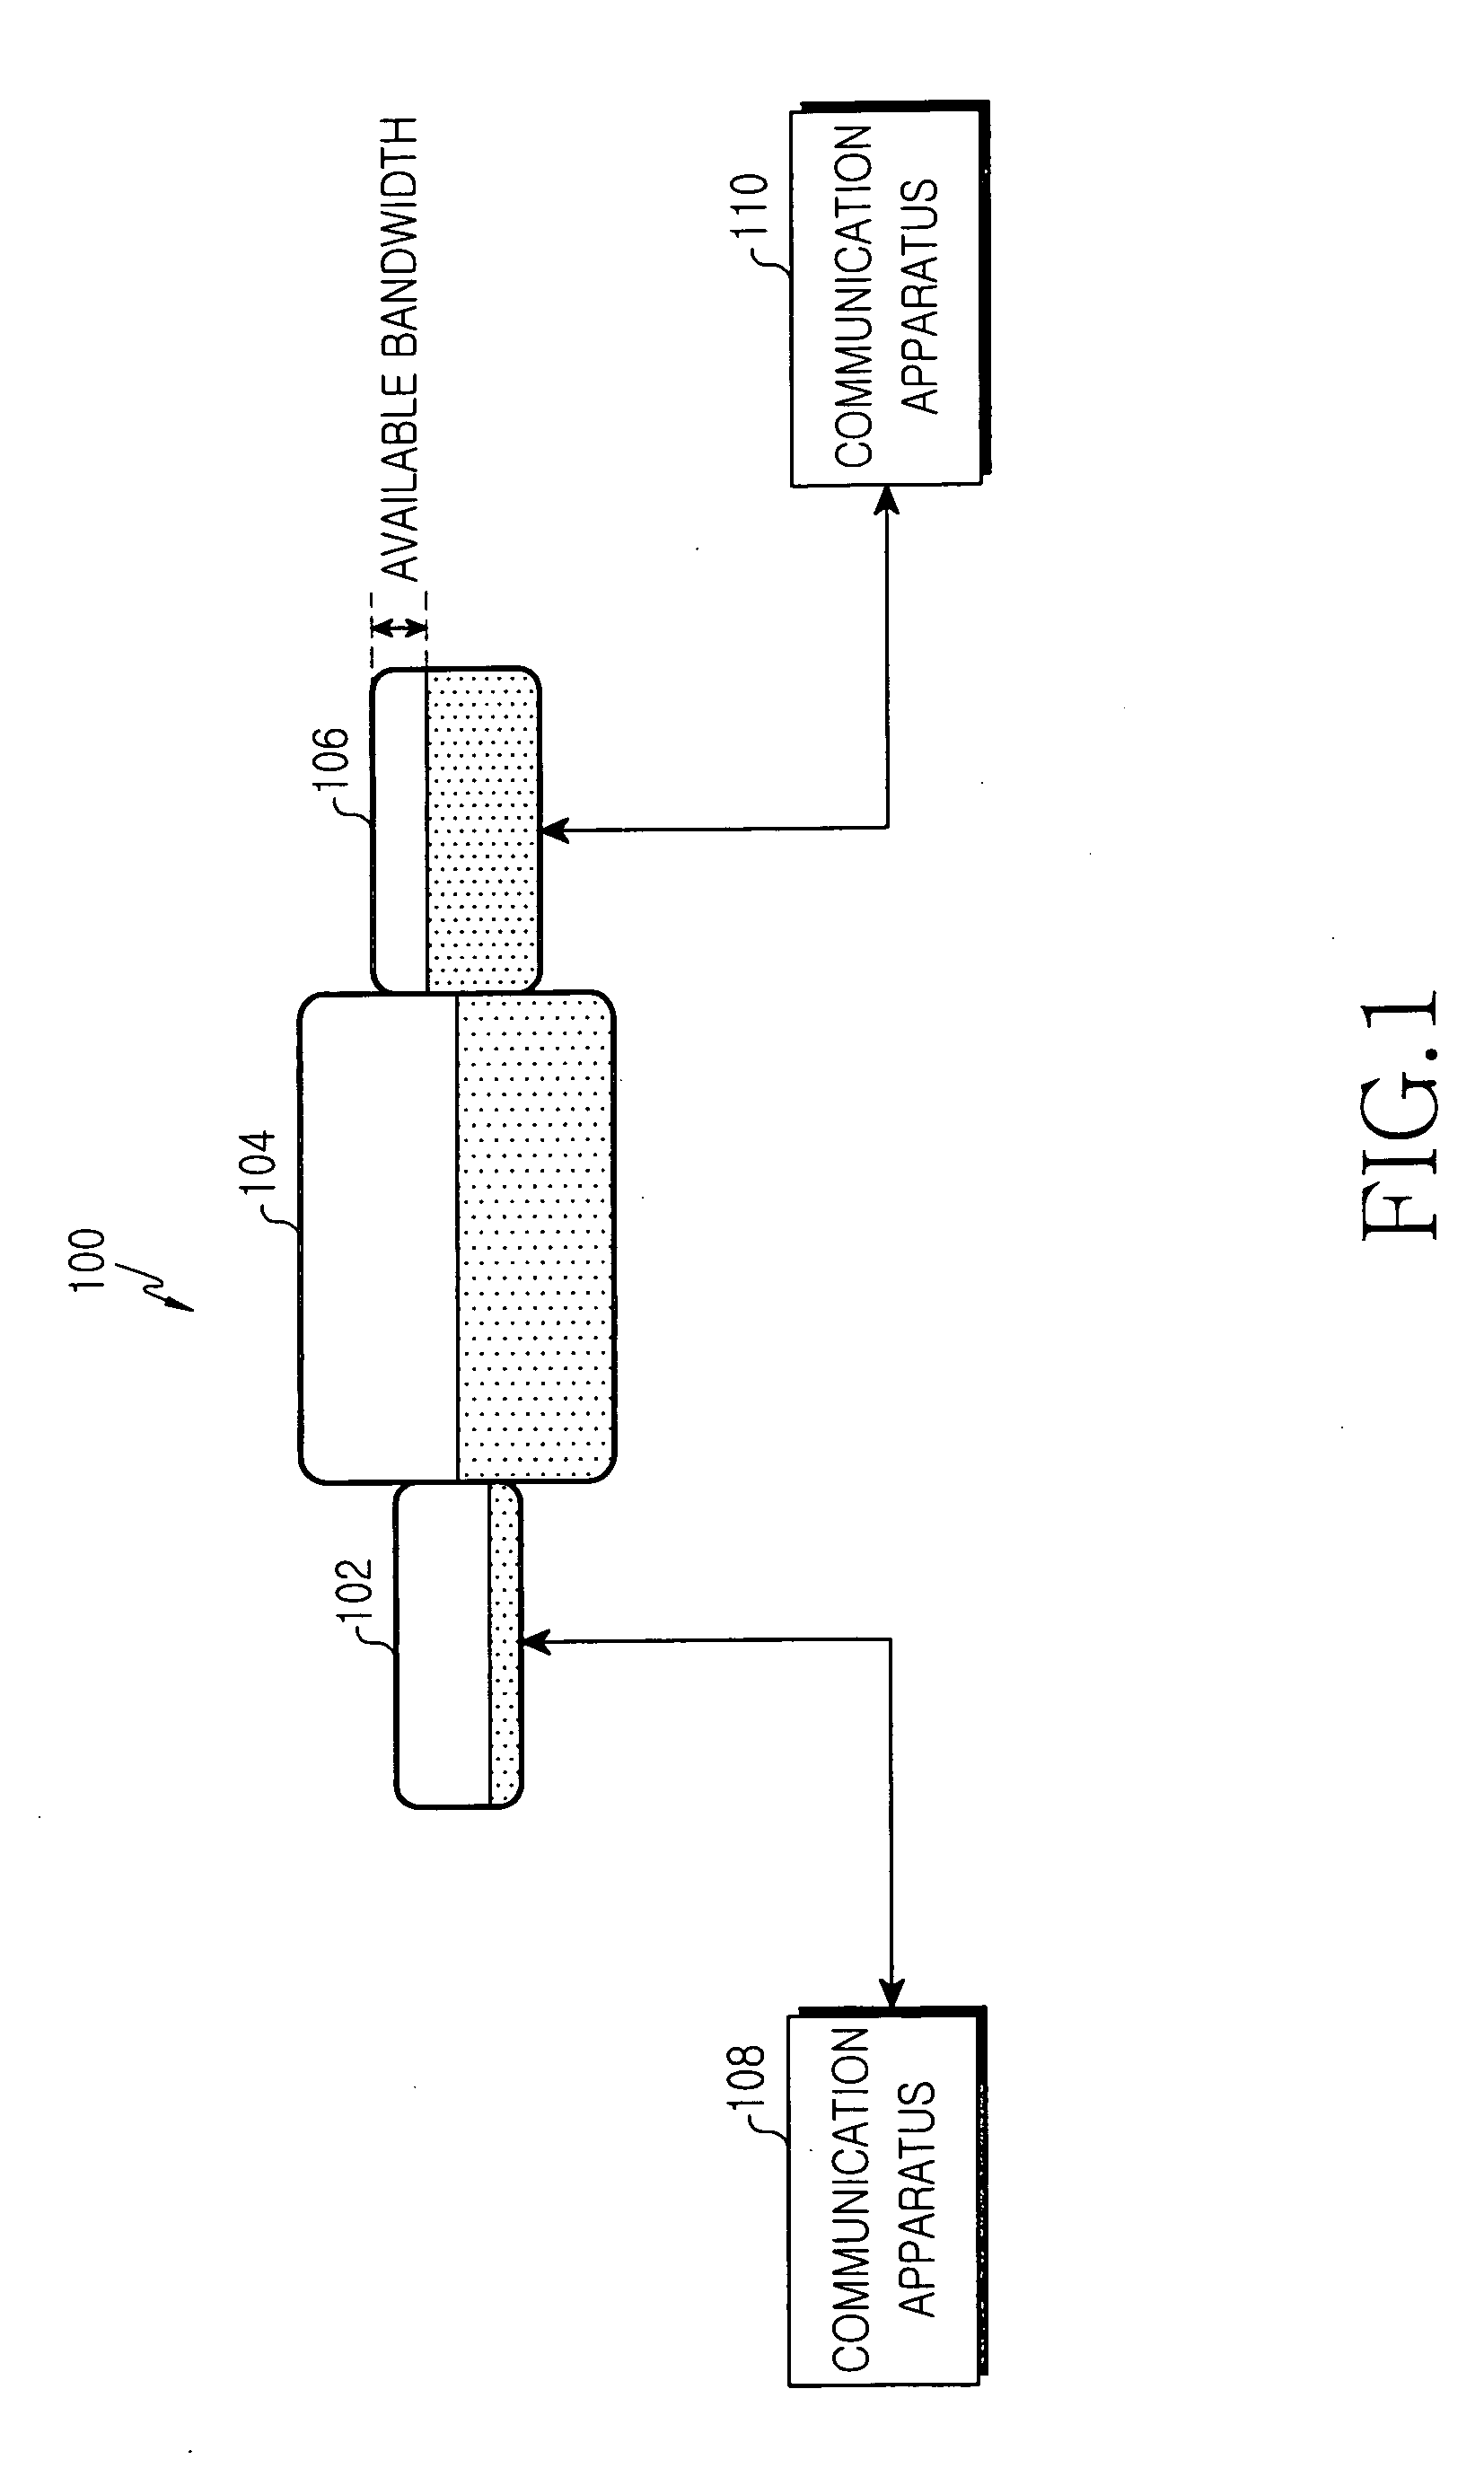 Method for estimating available bandwidth of network